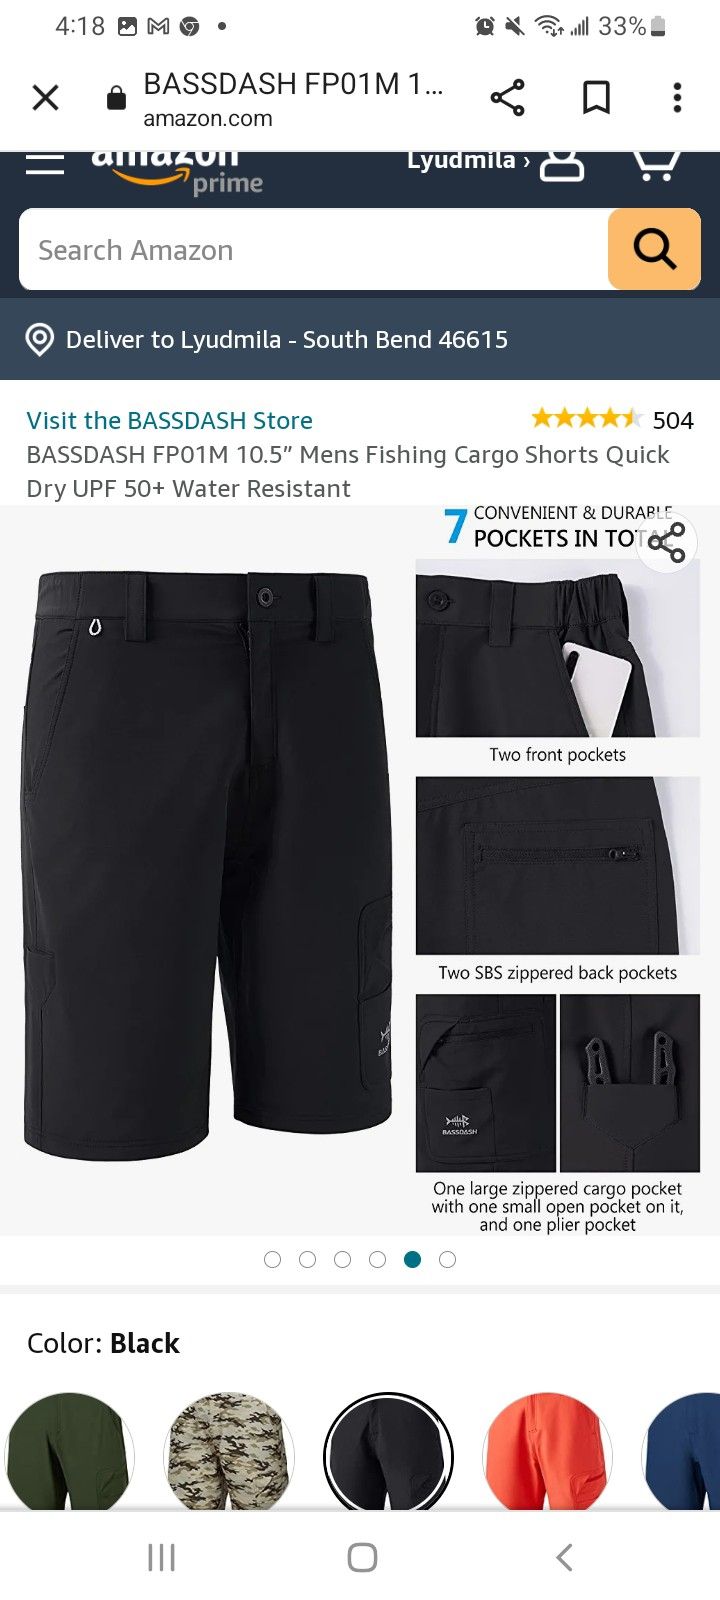 BASSDASH FP01M 10.5” Mens Fishing Cargo Shorts Quick Dry UPF 50+ Water Resistant
New with tag 
Size S